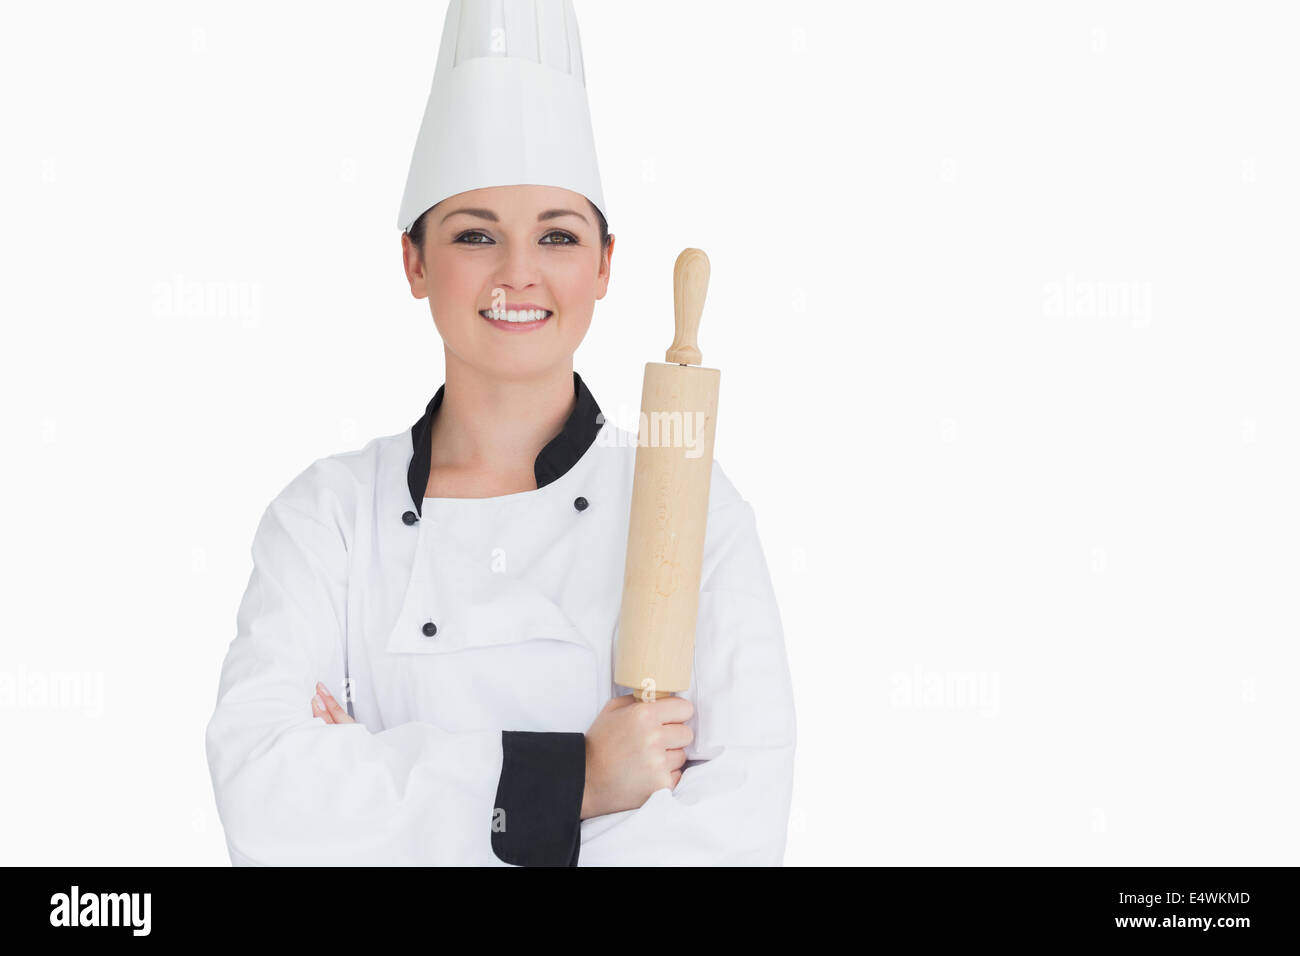 Happy cook holding a rolling pin Stock Photo - Alamy